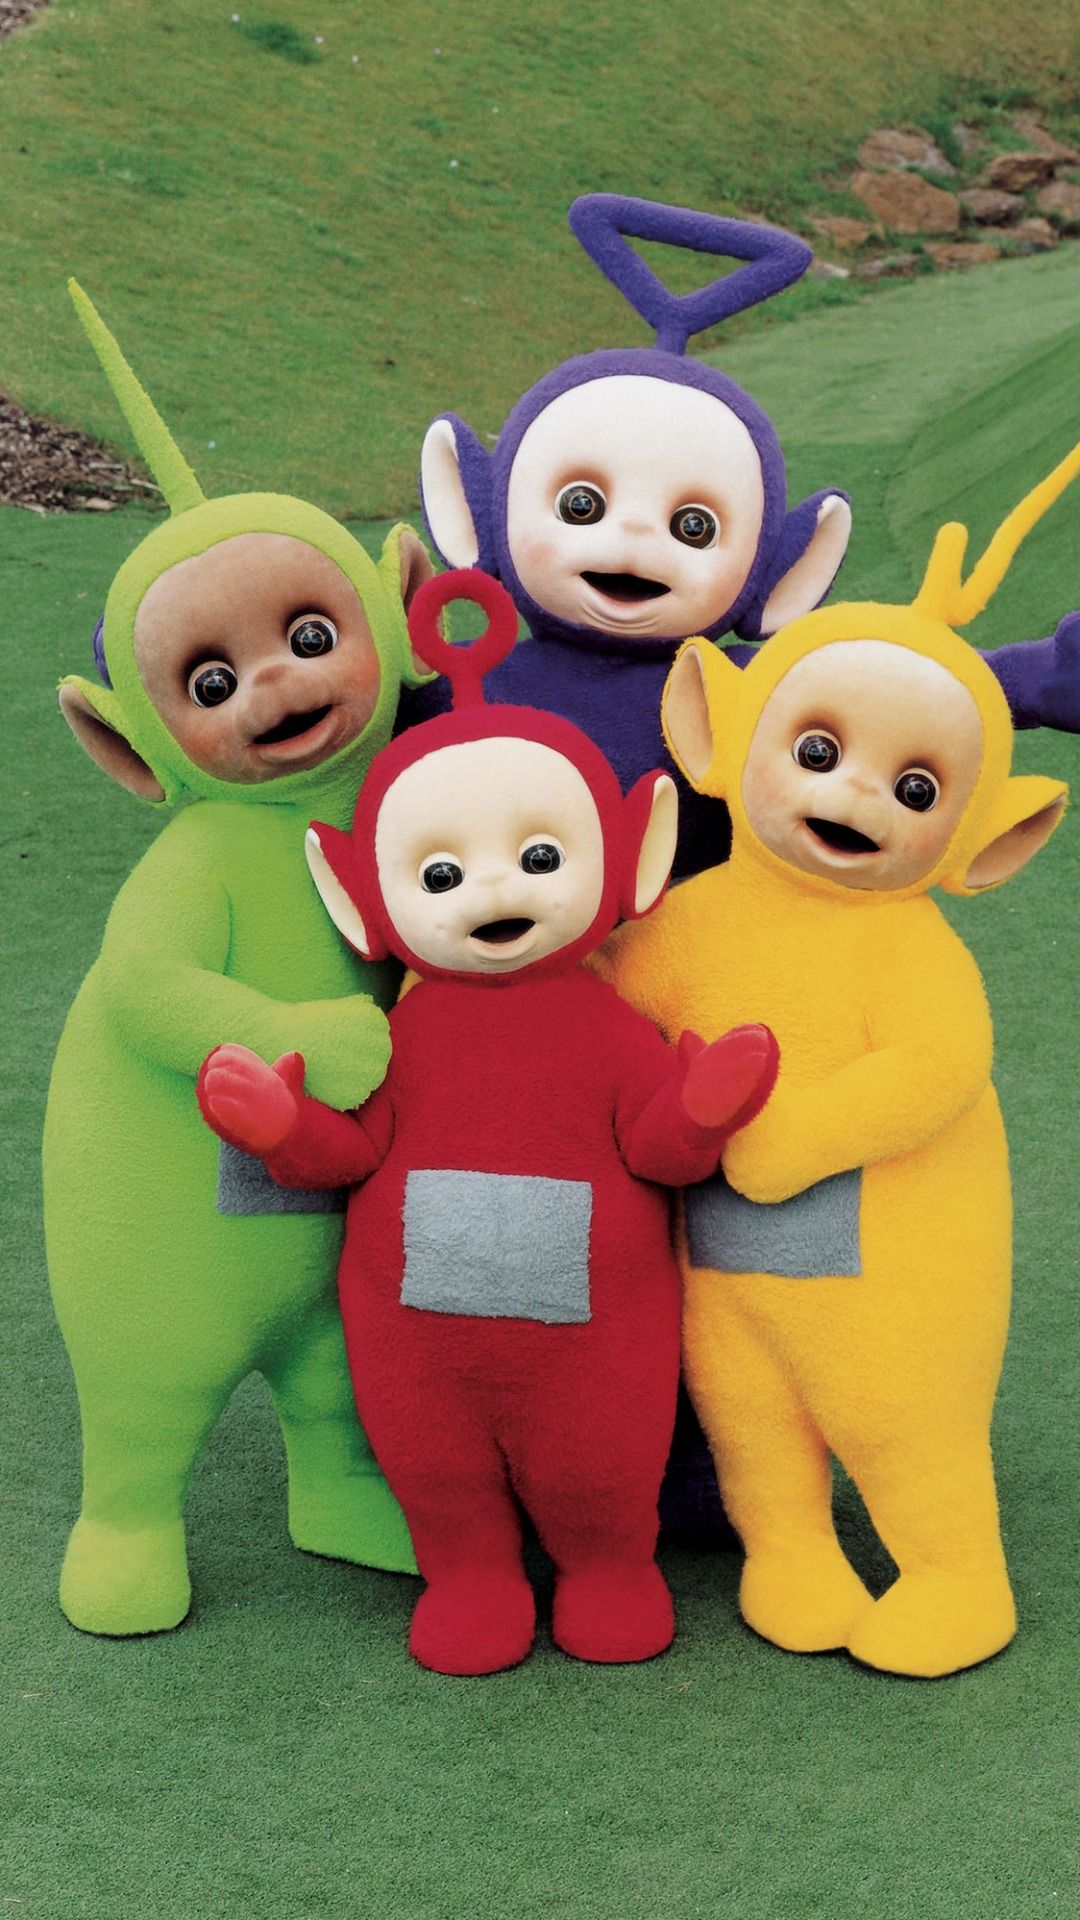 Download Teletubbies 1080 x 1920 Wallpapers - 4543993 ...